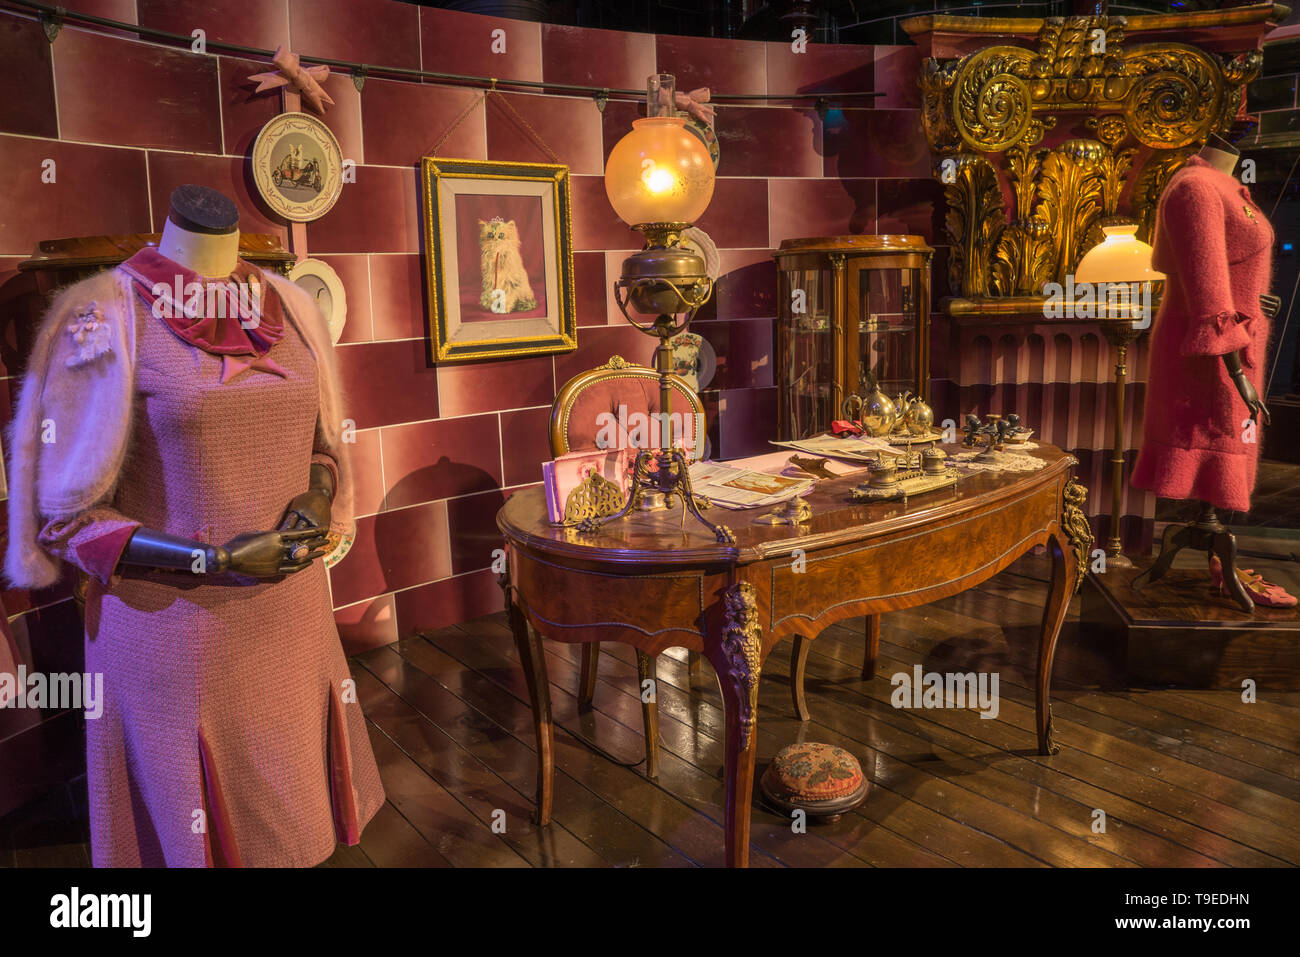 Warner Bros. Studio Tour London on X: Umbridge's office in Harry Potter  and the Deathly Hallows reflects her love for cats & all things pink!  #HarryPotter  / X